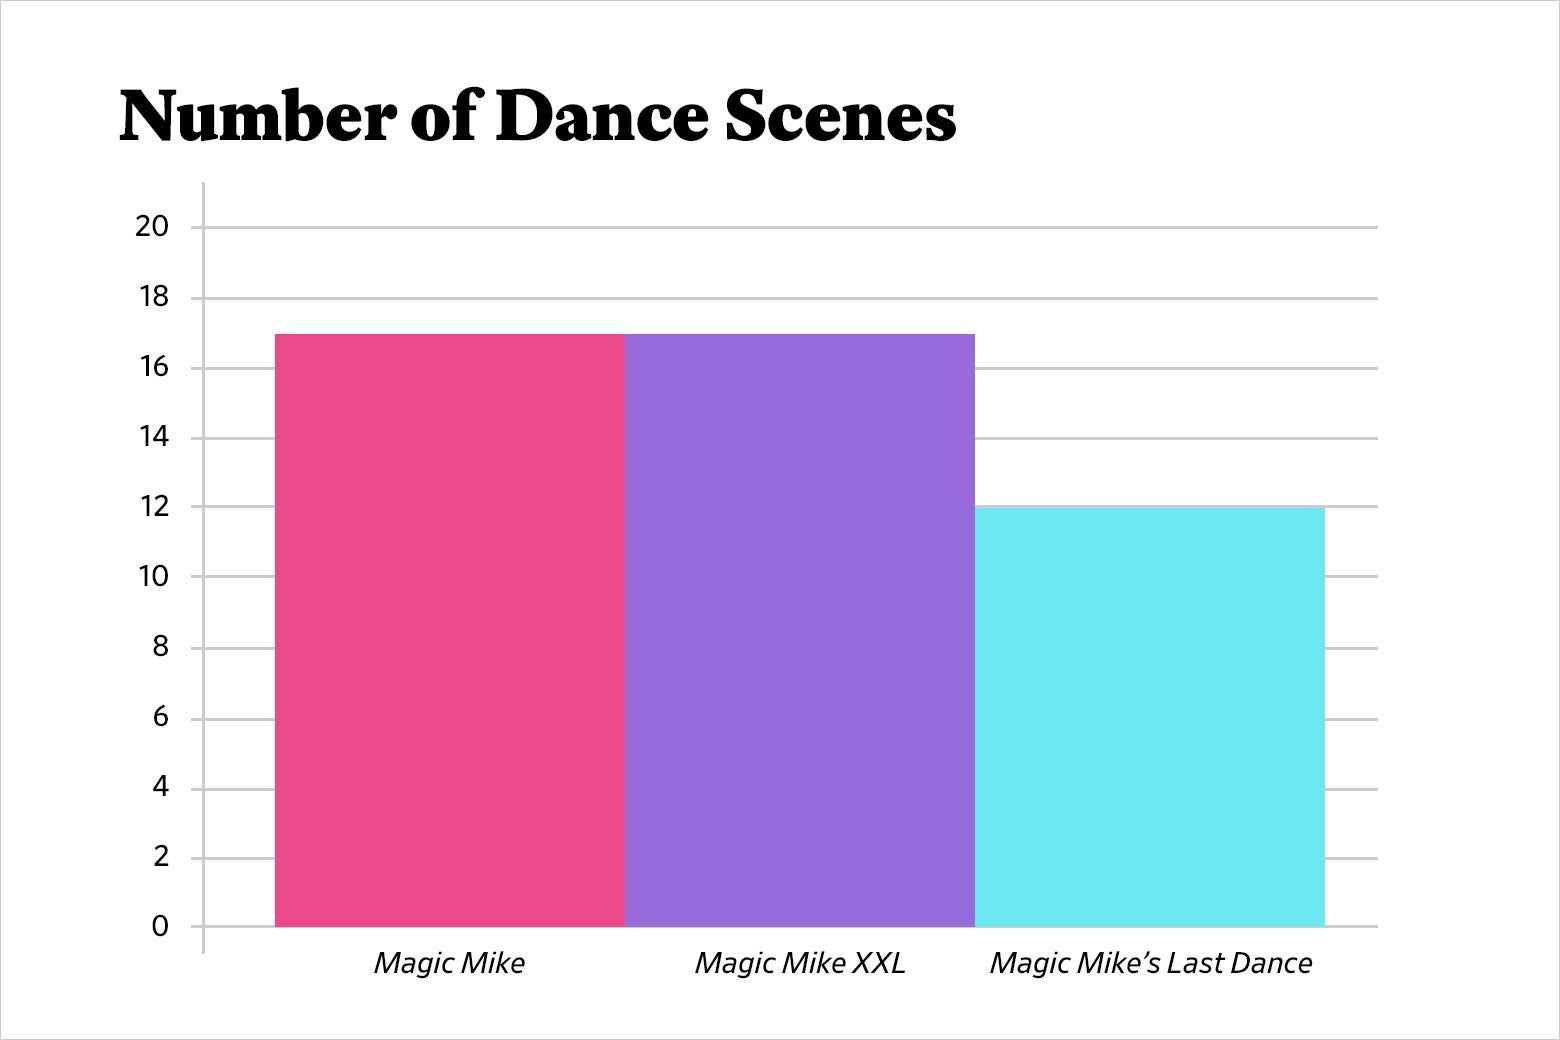 A bar chart with the heading: Number of Dance Scenes. Magic Mike is the first bar, in pink, which scores 17. Magic Mike XXL is the second bar, in purple, which scores 17. Magic Mike's Last Dance is the third bar, in blue, which scores 12. 